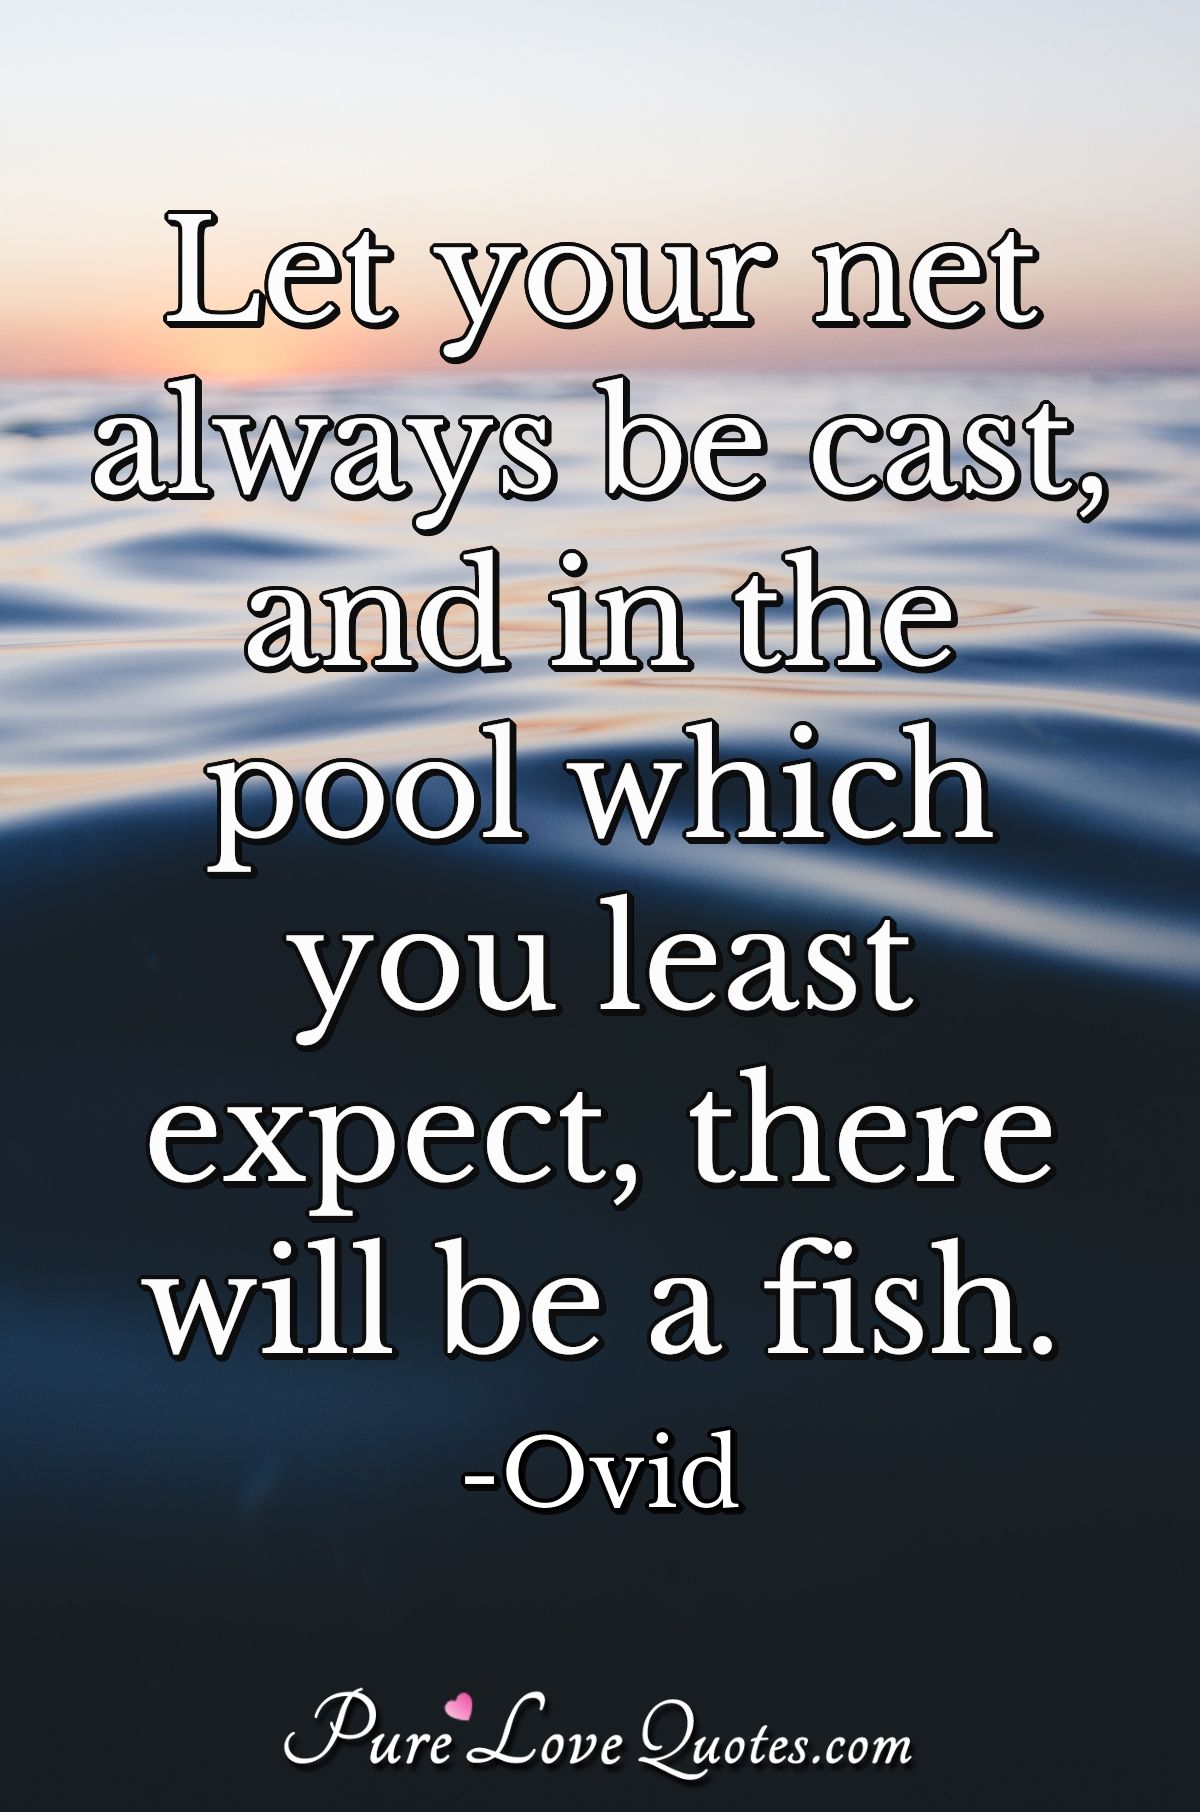 Let your net always be cast, and in the pool which you least expect, there will be a fish. - Ovid